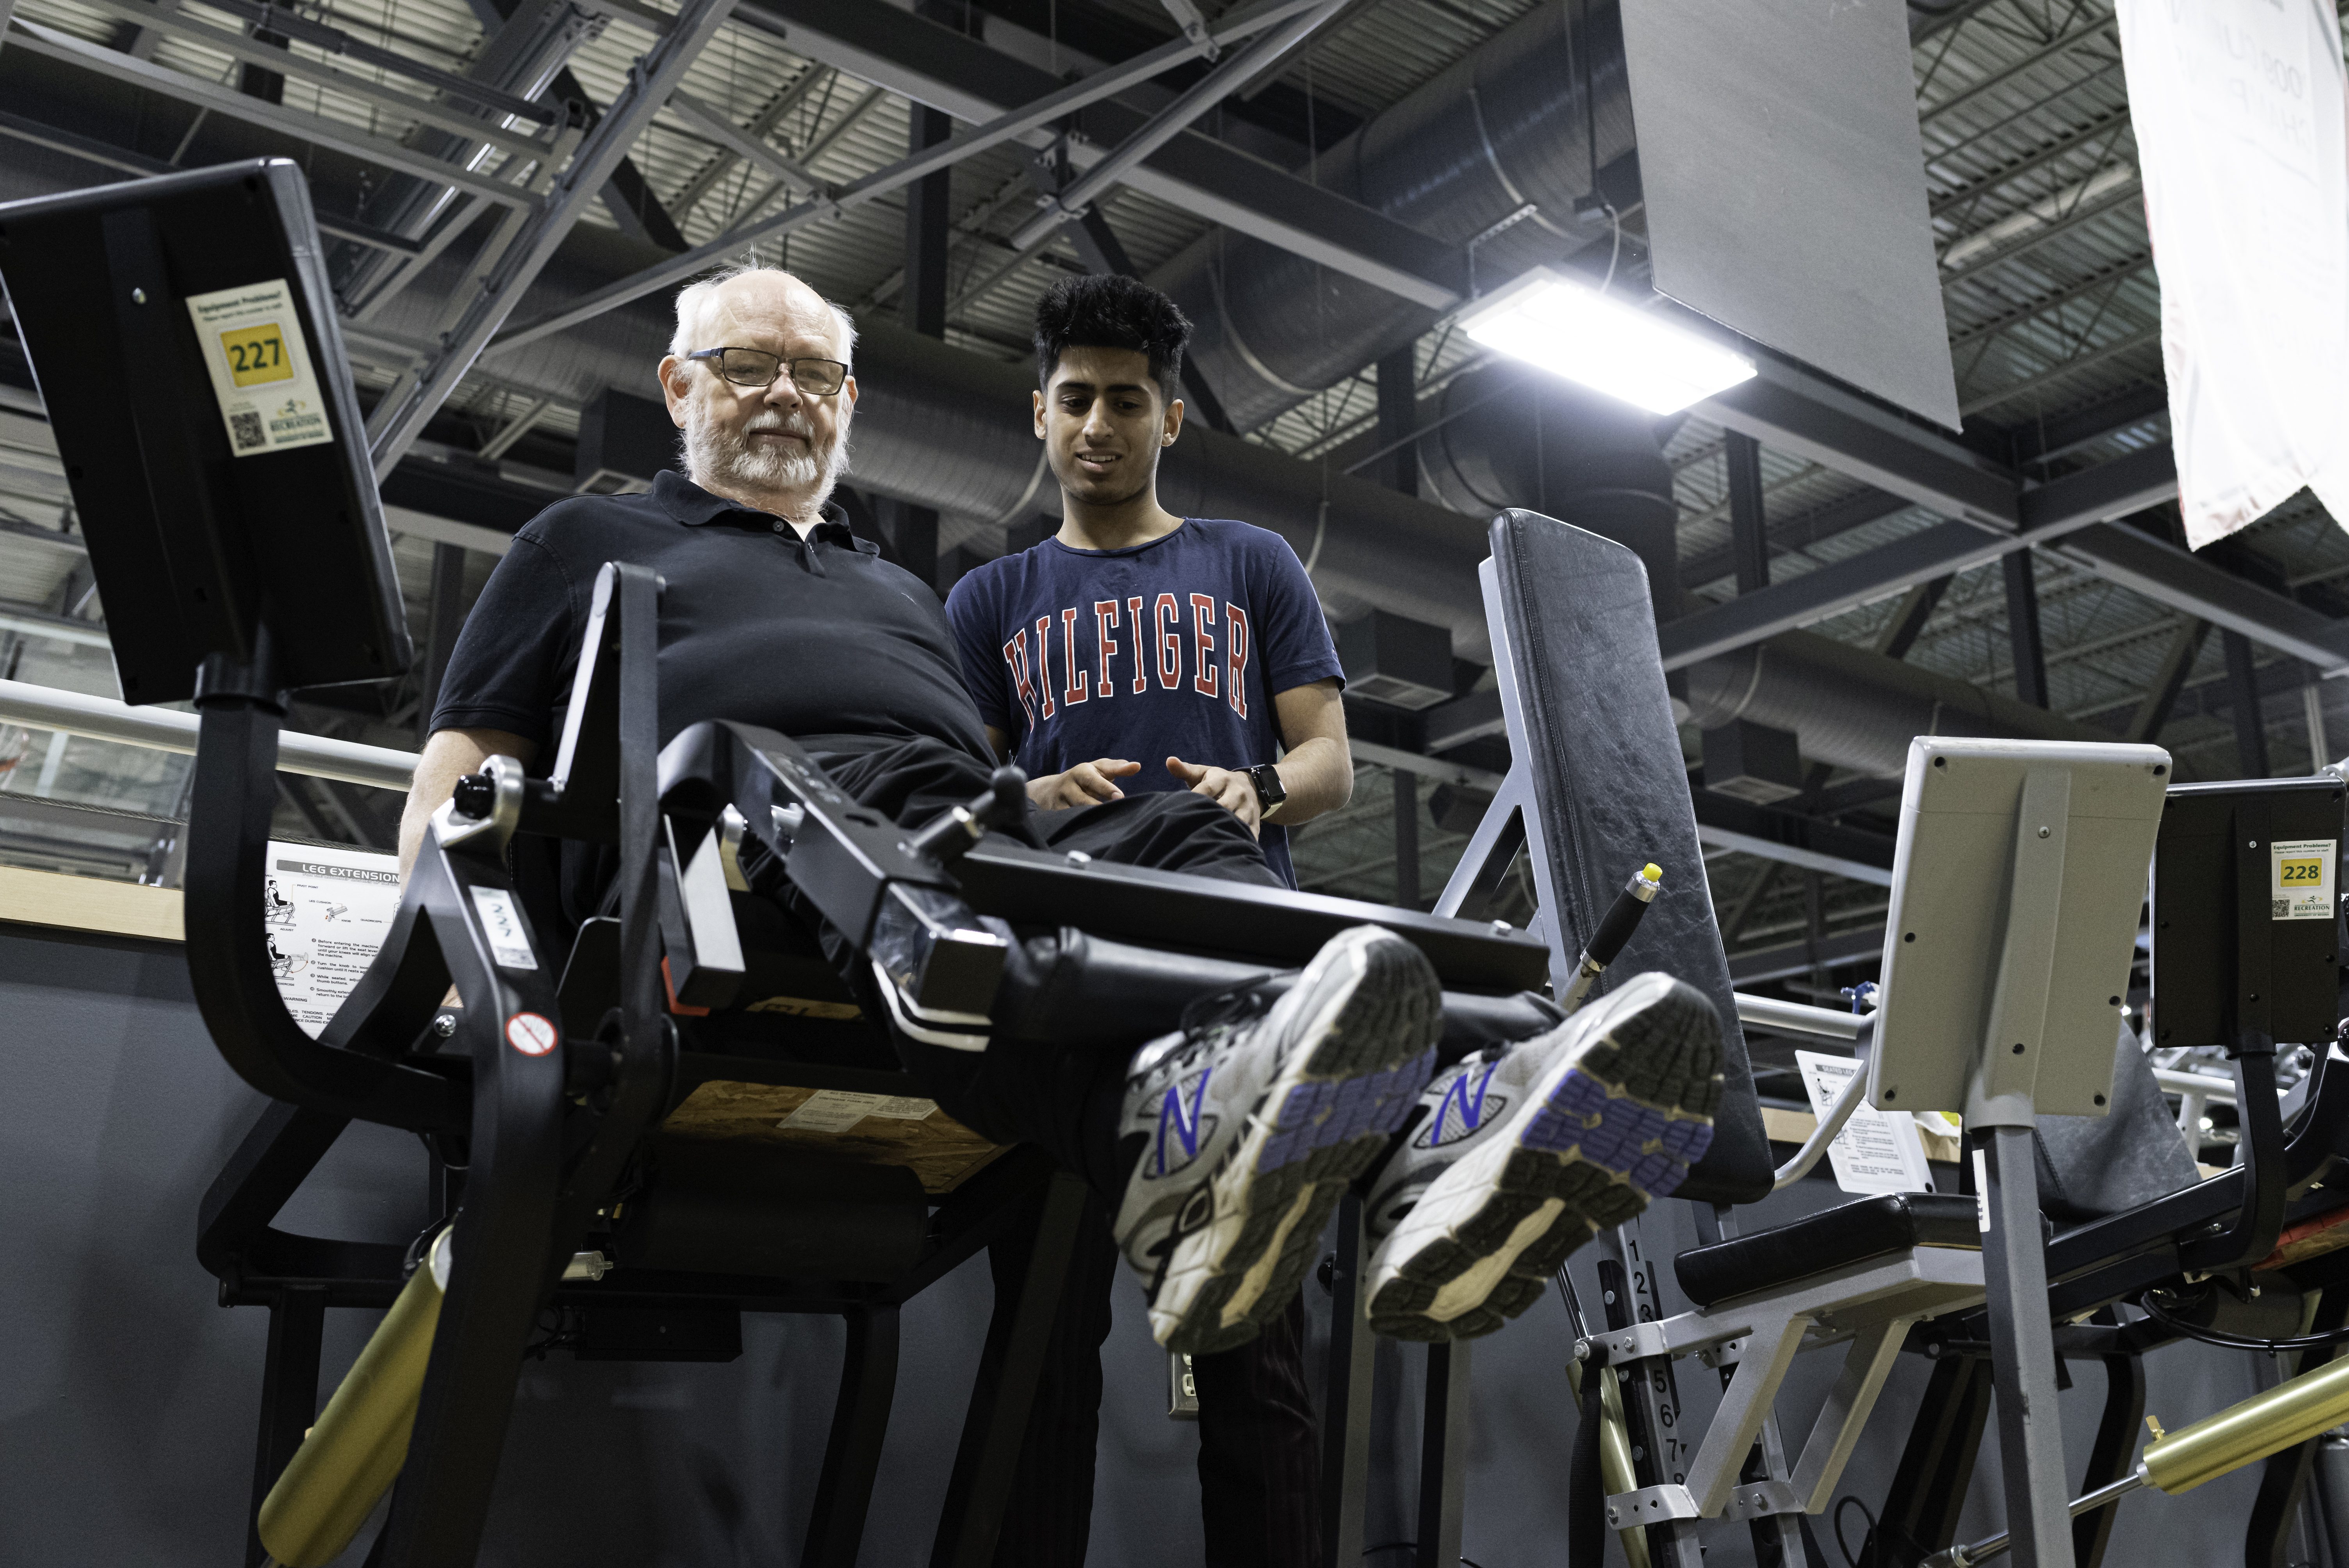 Ali Khan works with Allan Johnson as he does leg presses in the gym at the University of Regina. (Photo by Michael Bell)